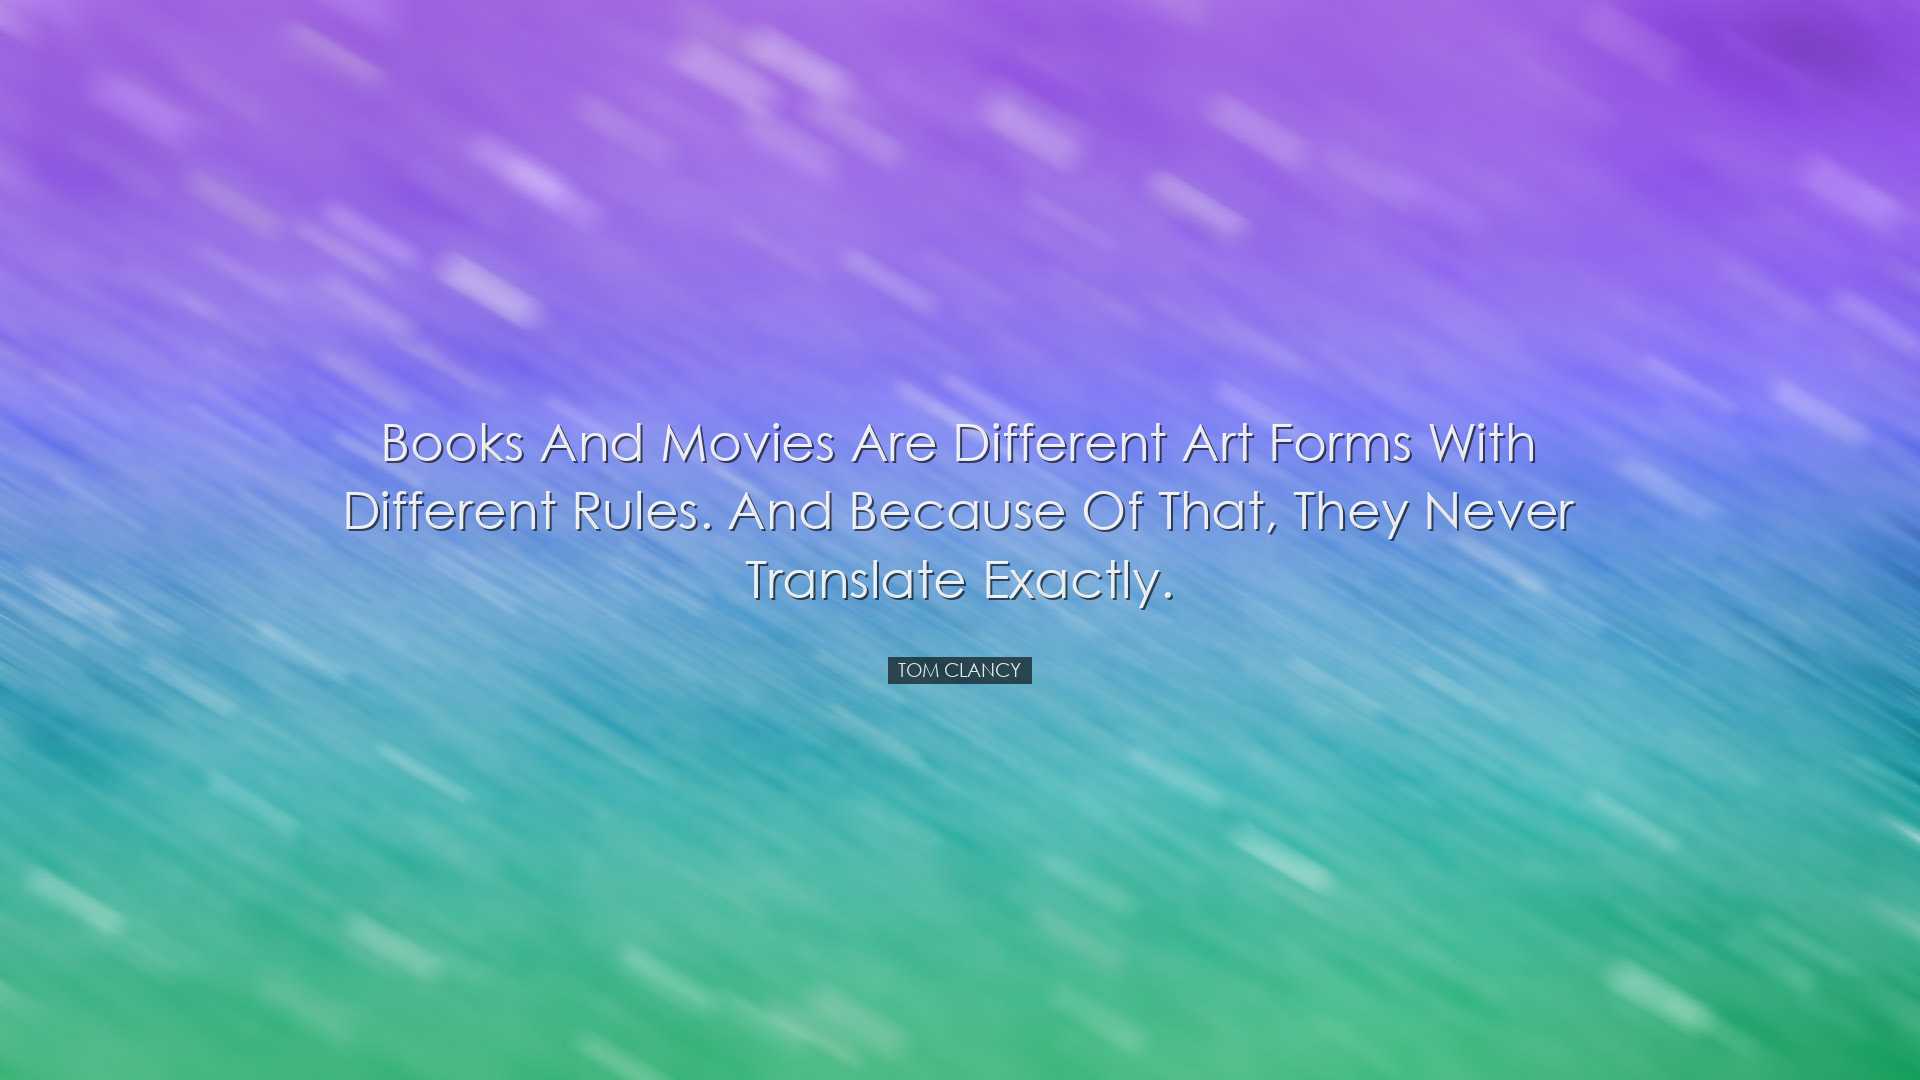 Books and movies are different art forms with different rules. And